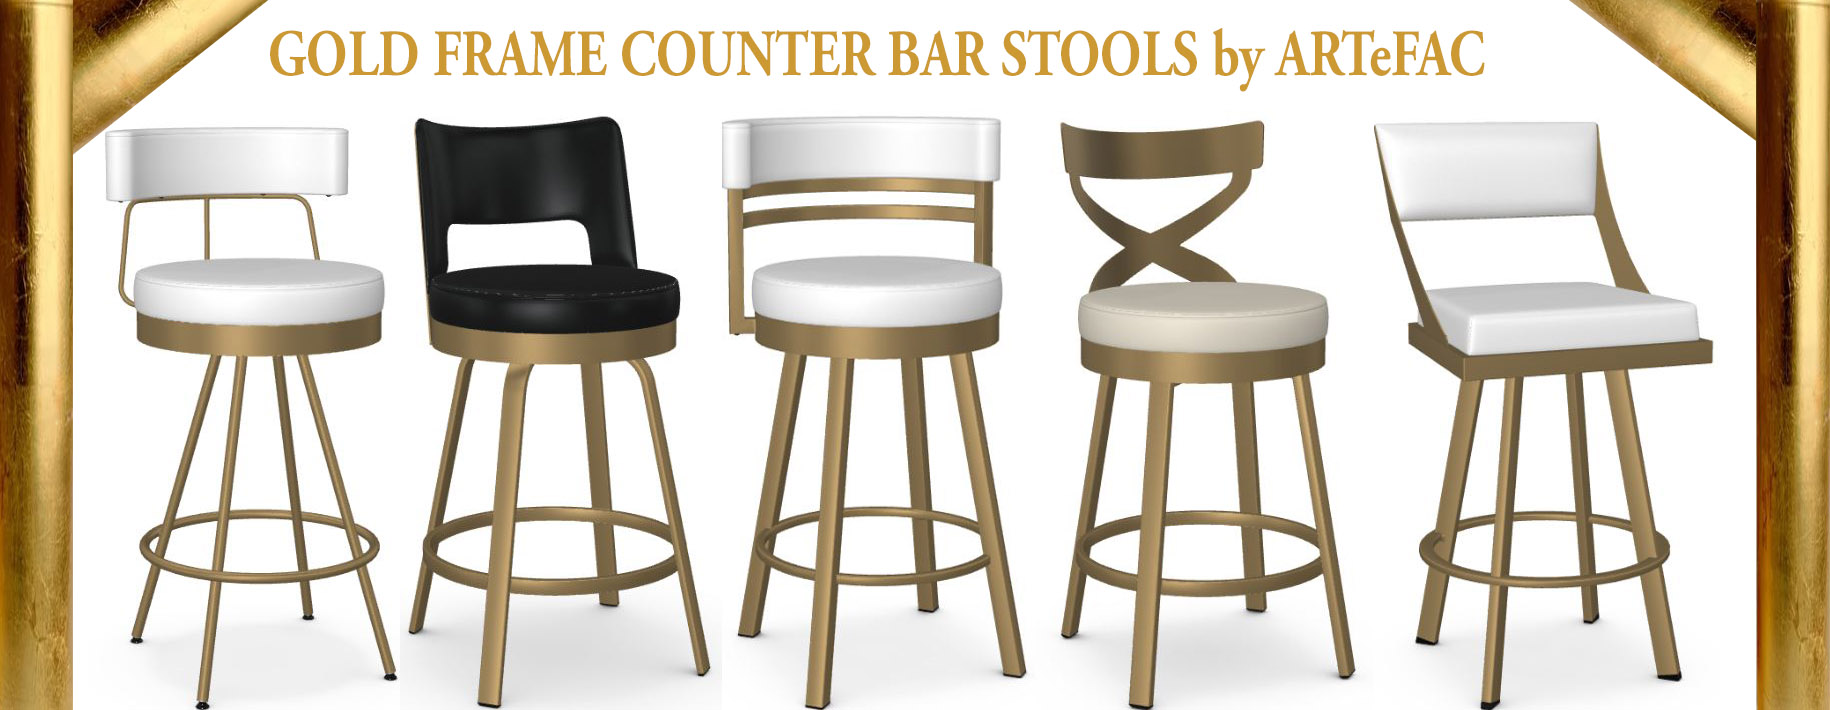 Chairs Bar Stools In Usa Artefac, 34 25 In Adjustable Modern Backless Metal Swivel Bar Stool With Wooden Seat